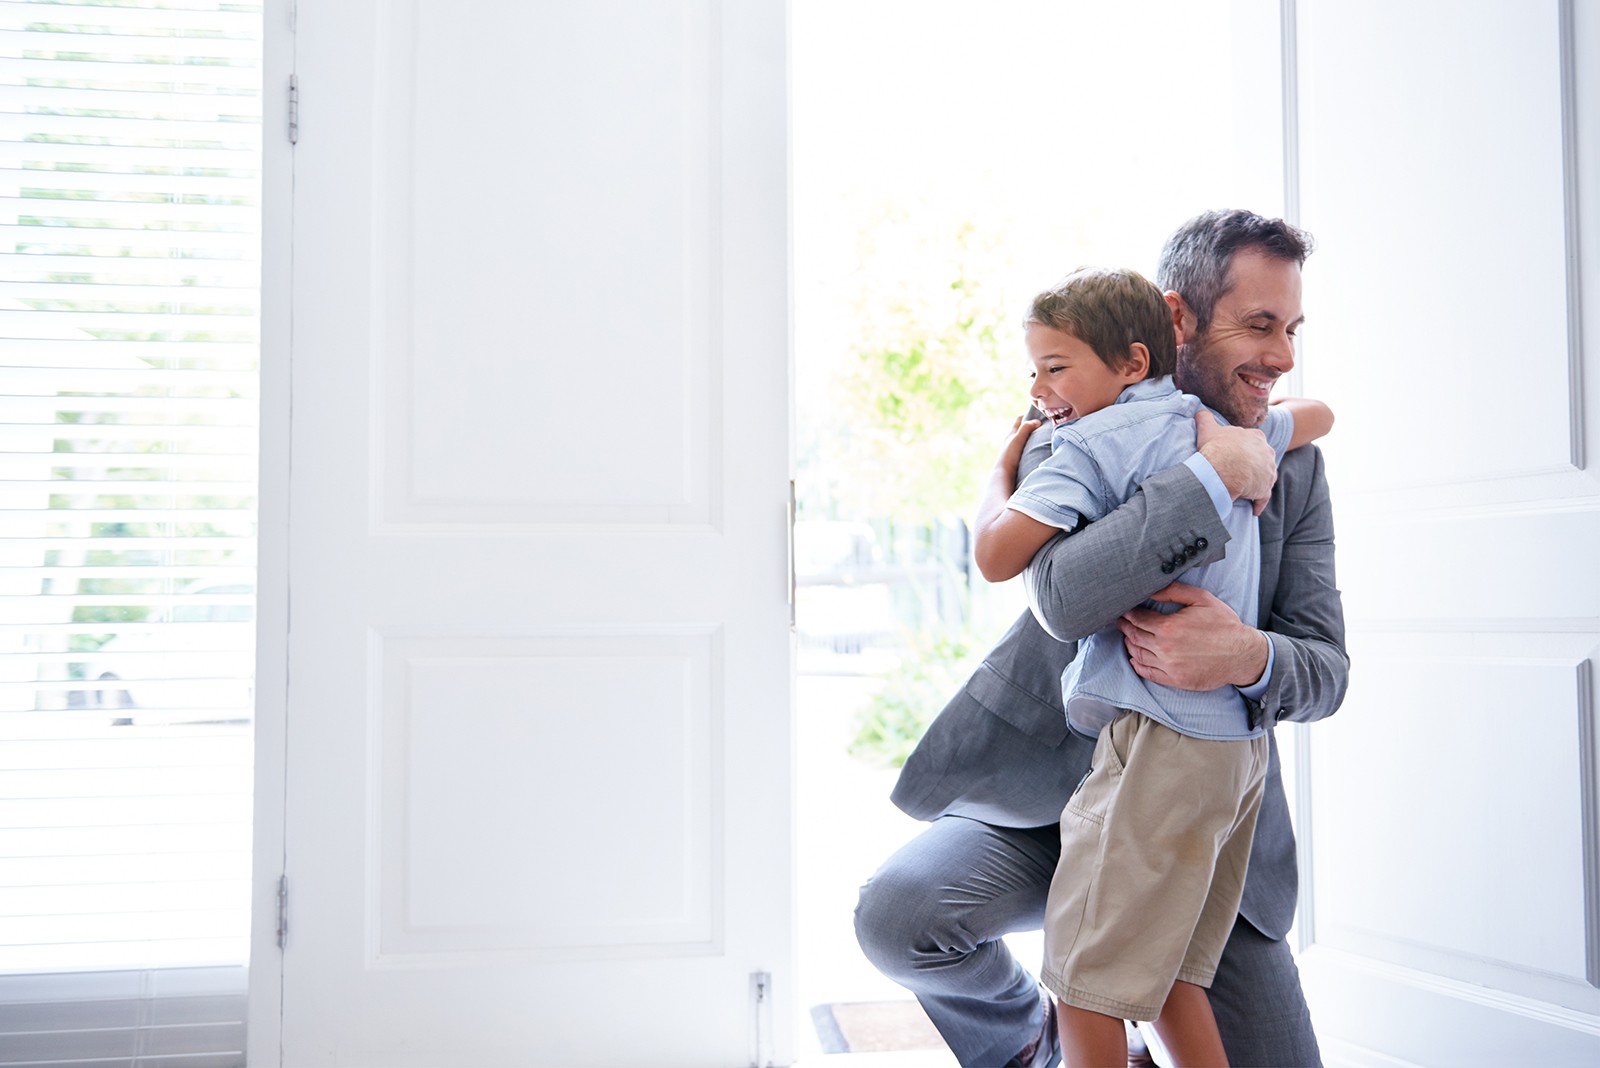 Mindsight & Interpersonal Neurobiology, a man hugging his son in a bright room.